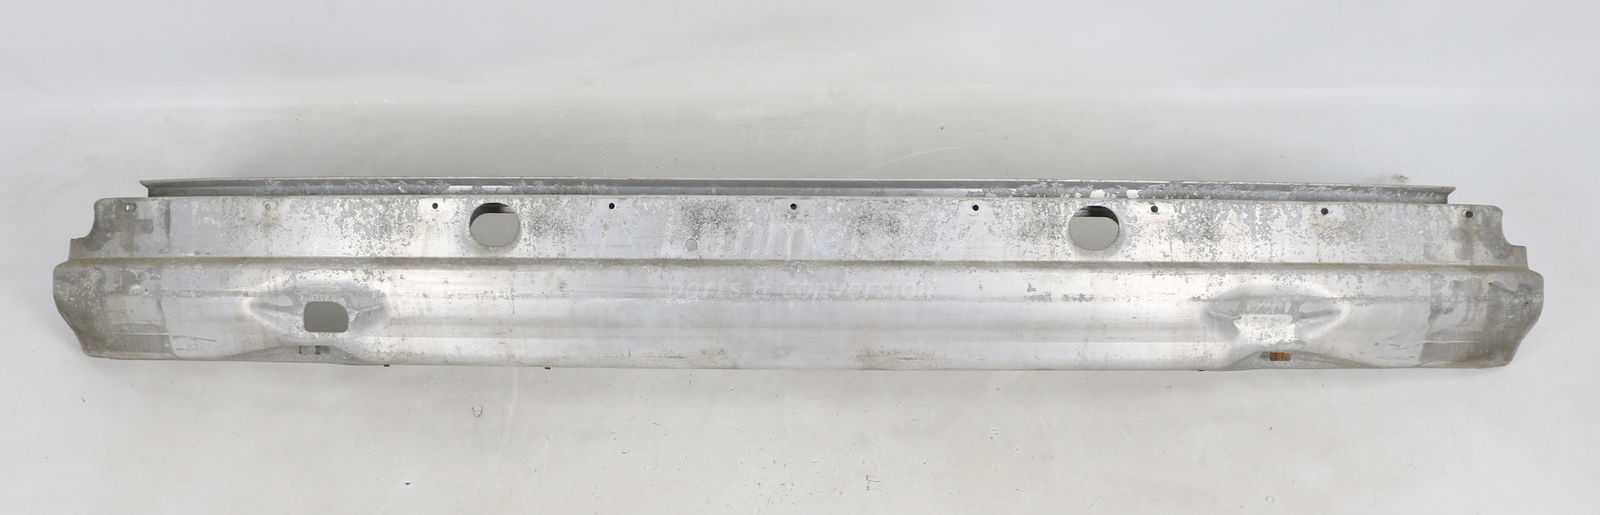 Picture of BMW 51128150422 Rear Bumper Center Carrier Metal Rebar Core E38 for sale